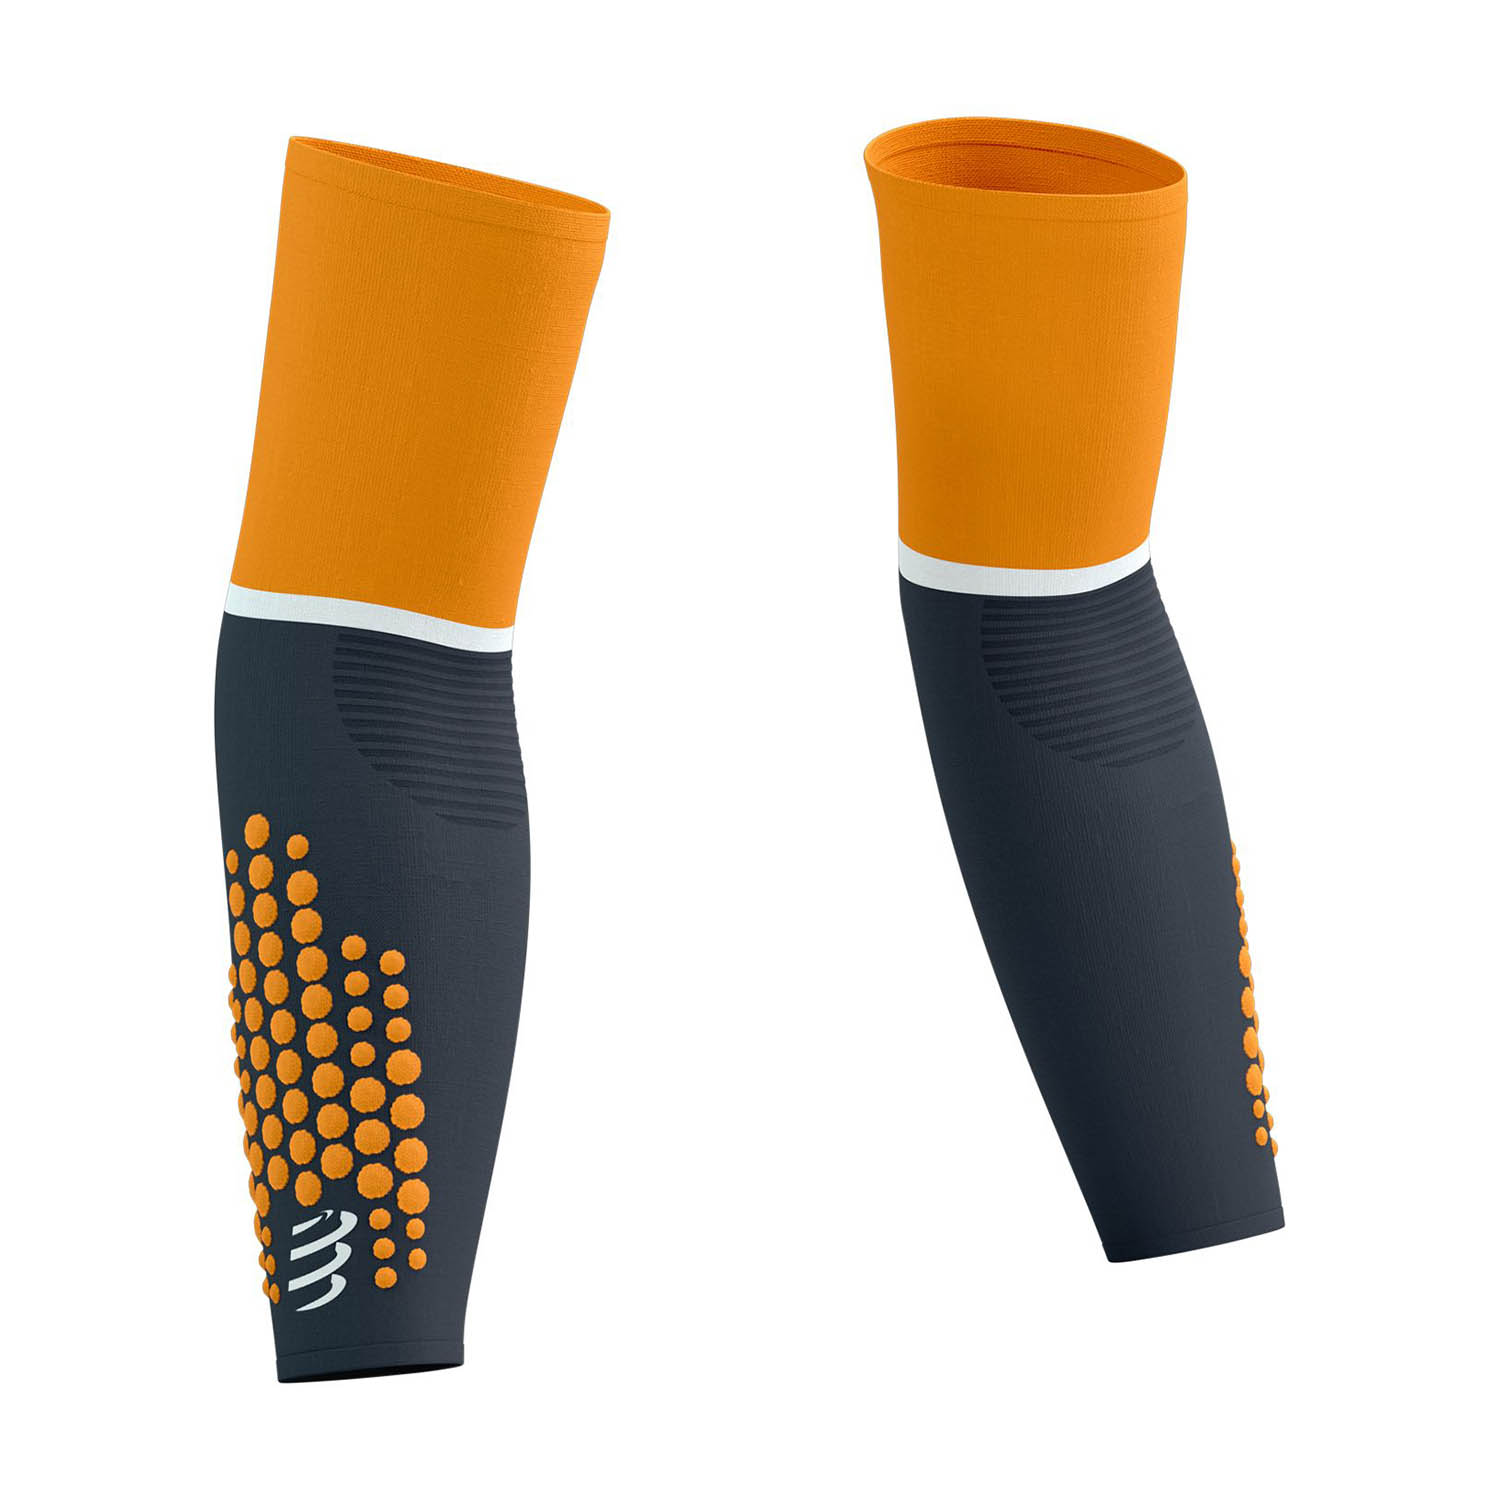 Compressport Armforce Ultralight Compression Sleeves - Magnet/Autumn Glory